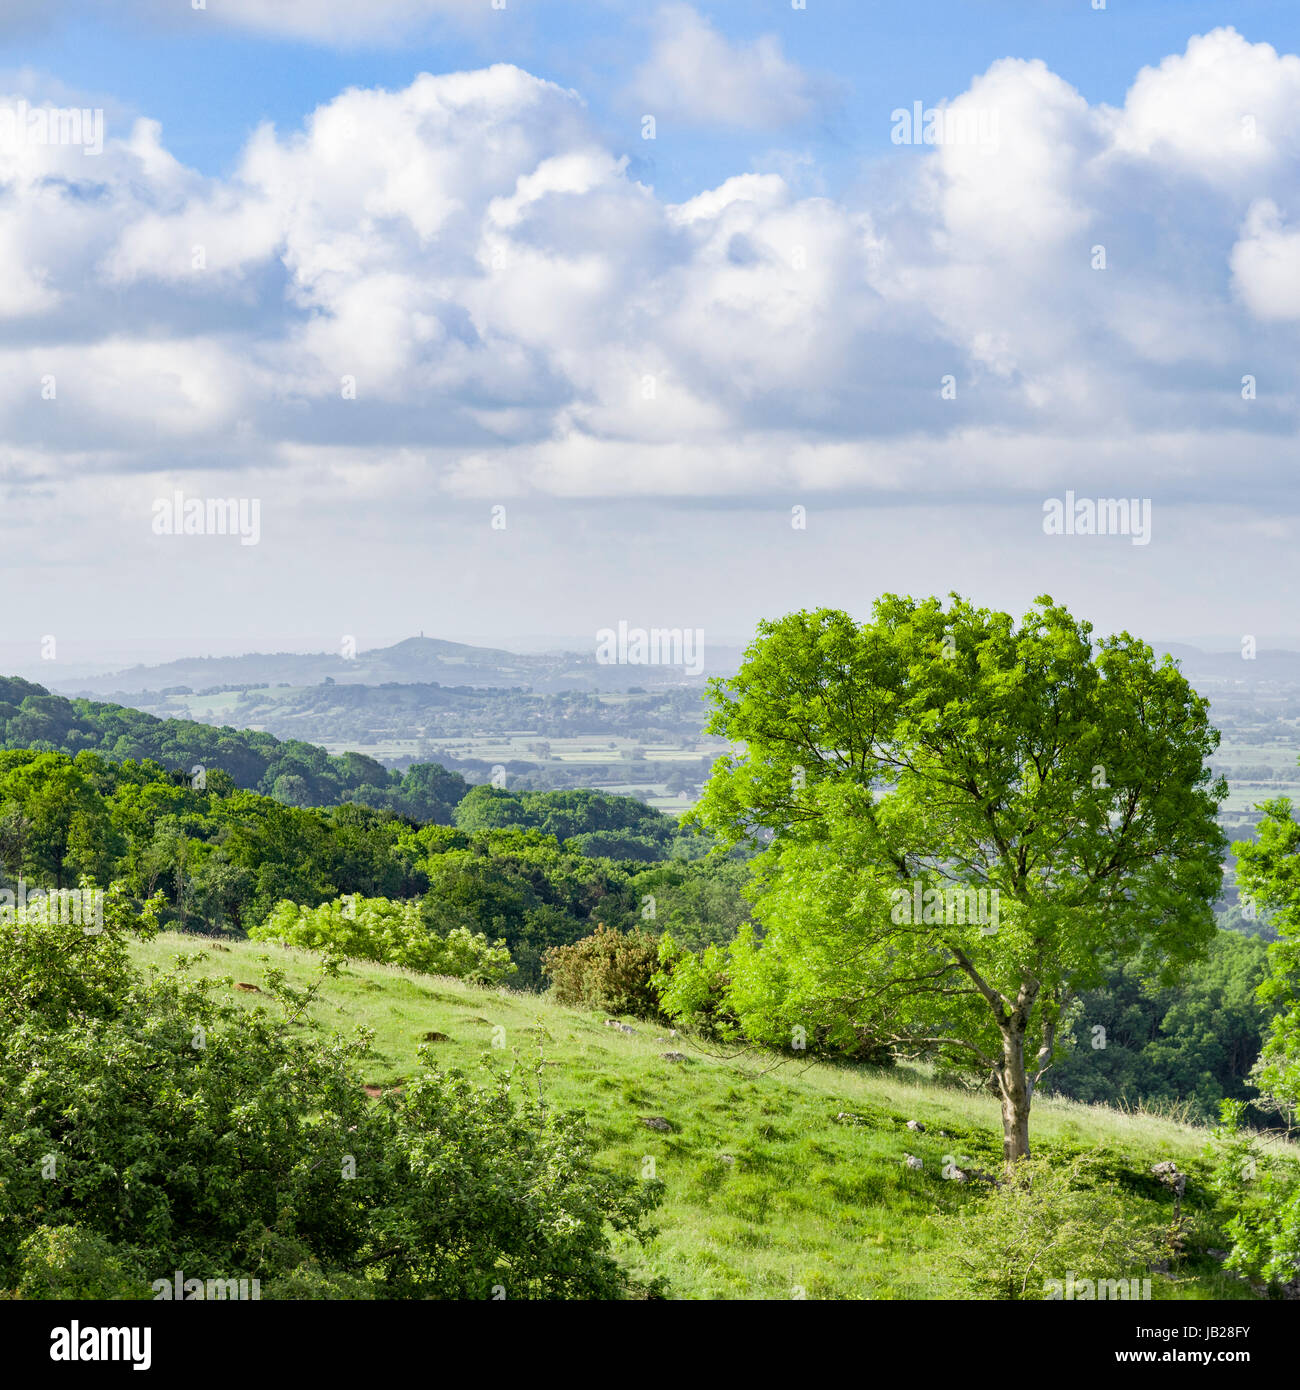 The view from the top of Cheddar Gorge in Somerset, looking across the Somerset Levels towards Glastonbury Tor, as seen during the Gorge Walk. Stock Photo